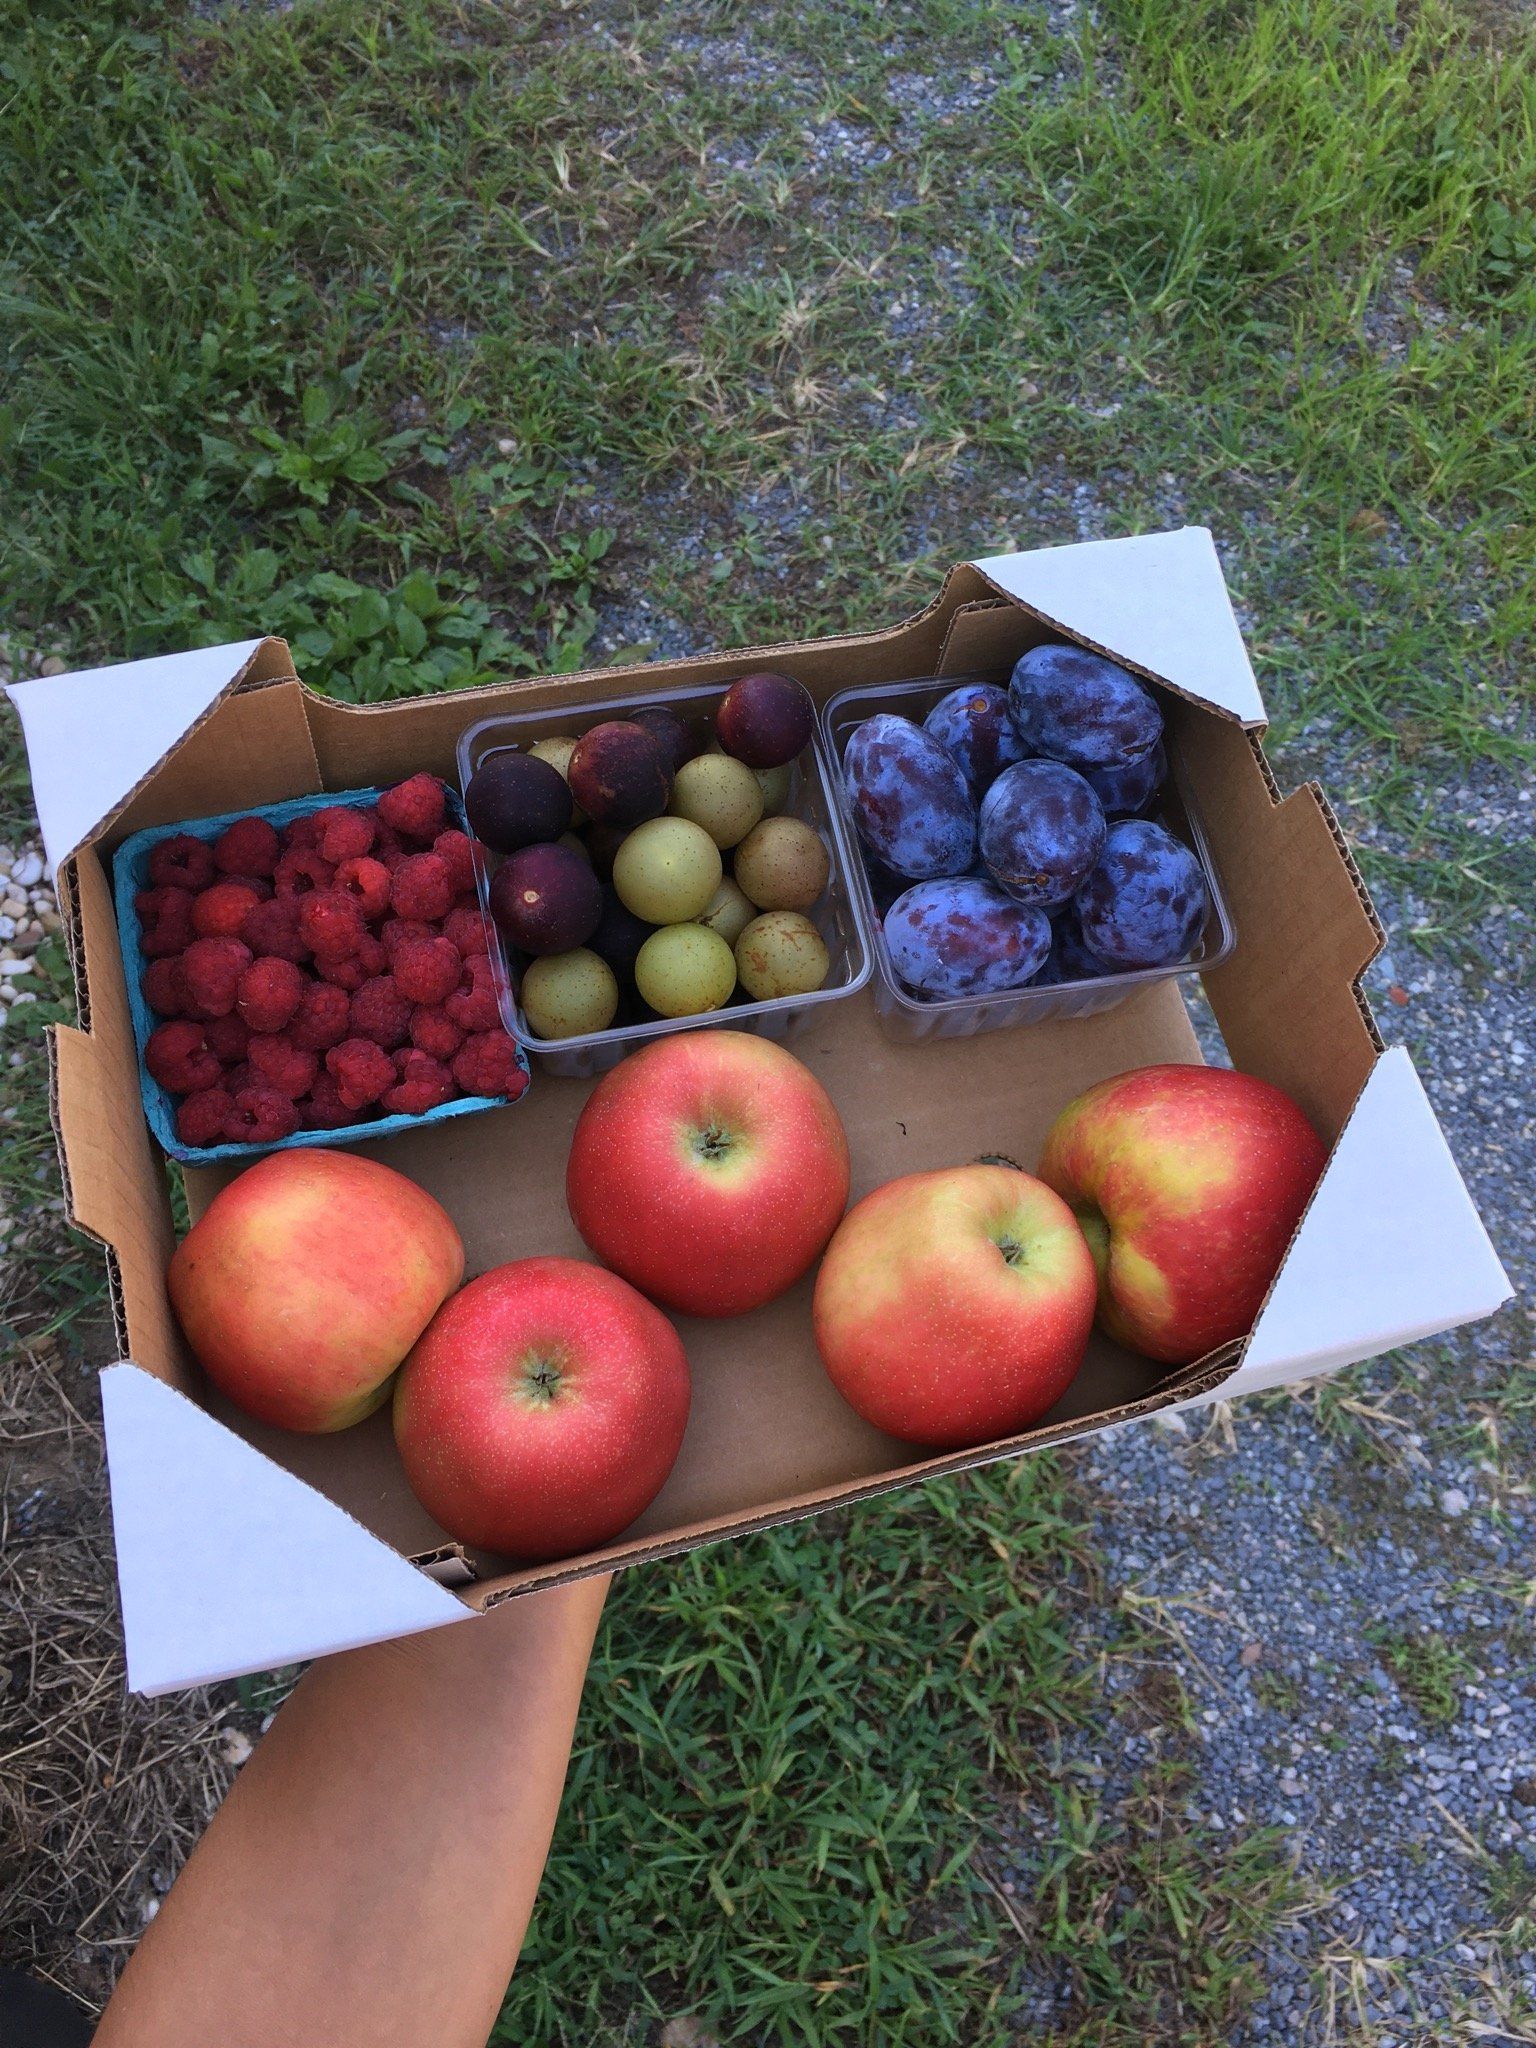 Previous Happening: Final week of the Summer Farm Share. Next week begins the Fall Farm Share